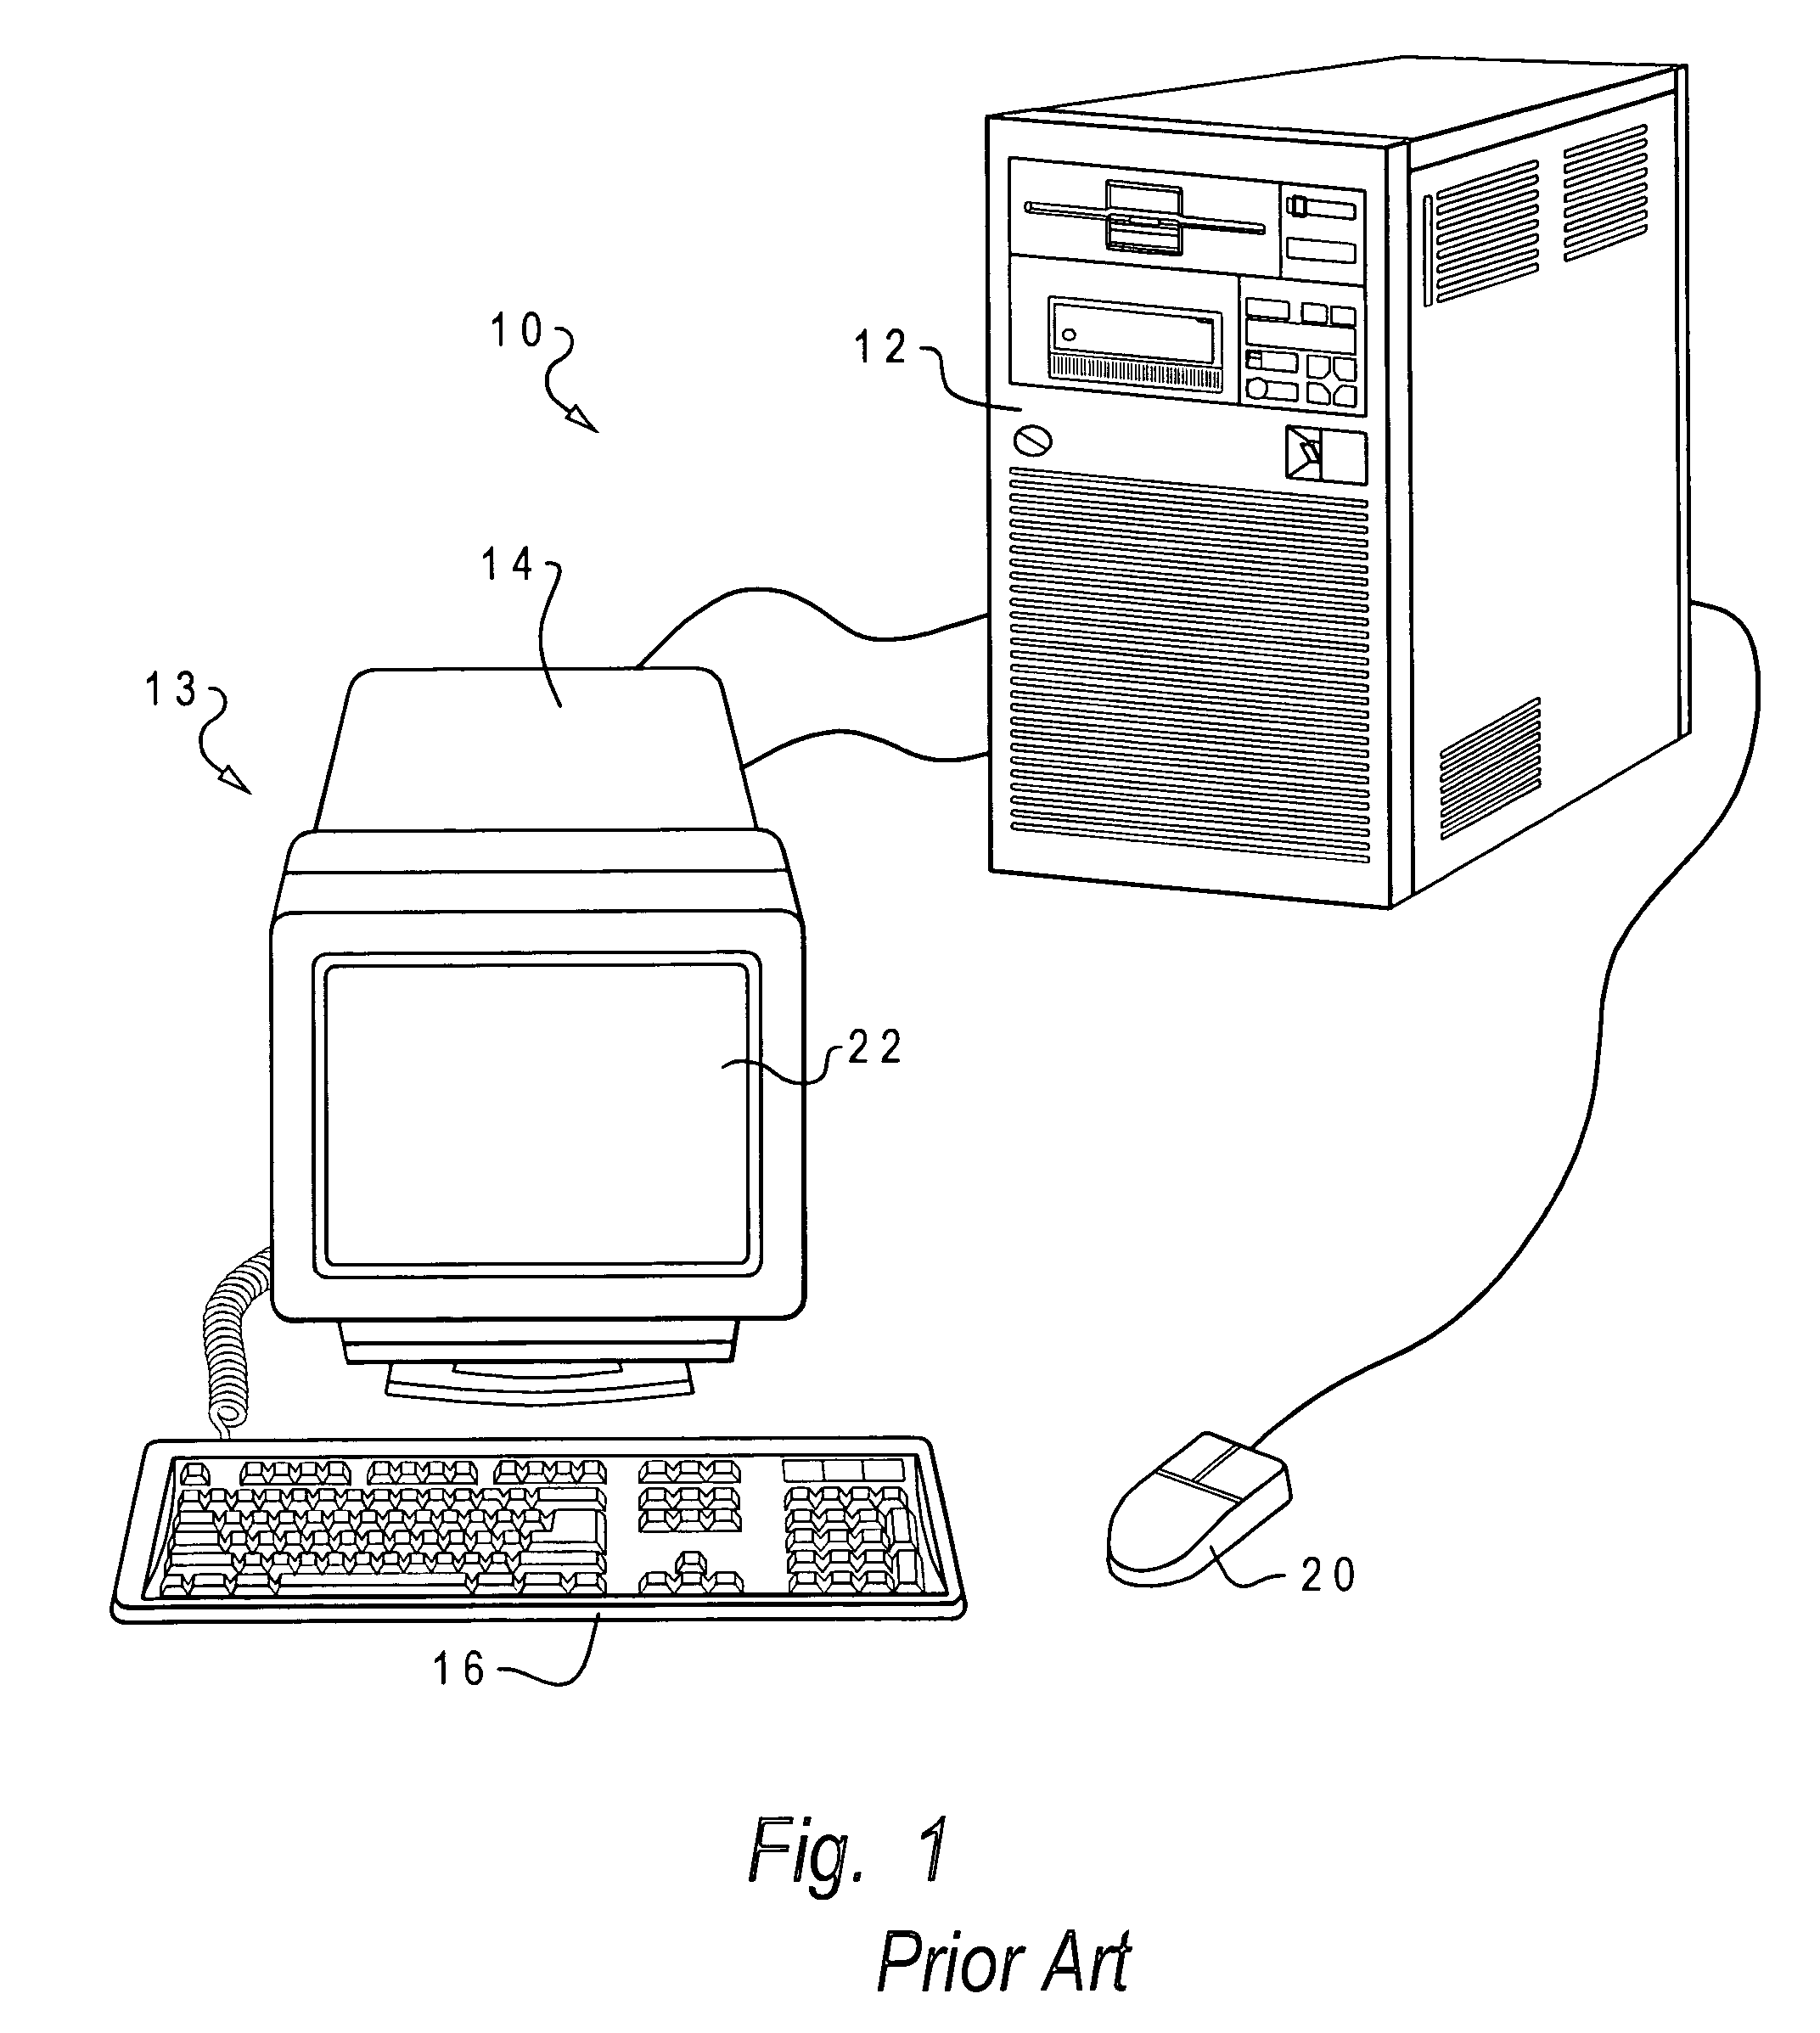 Method, system and program product for defining and recording minimum and maximum event counts of a simulation utilizing a high level language